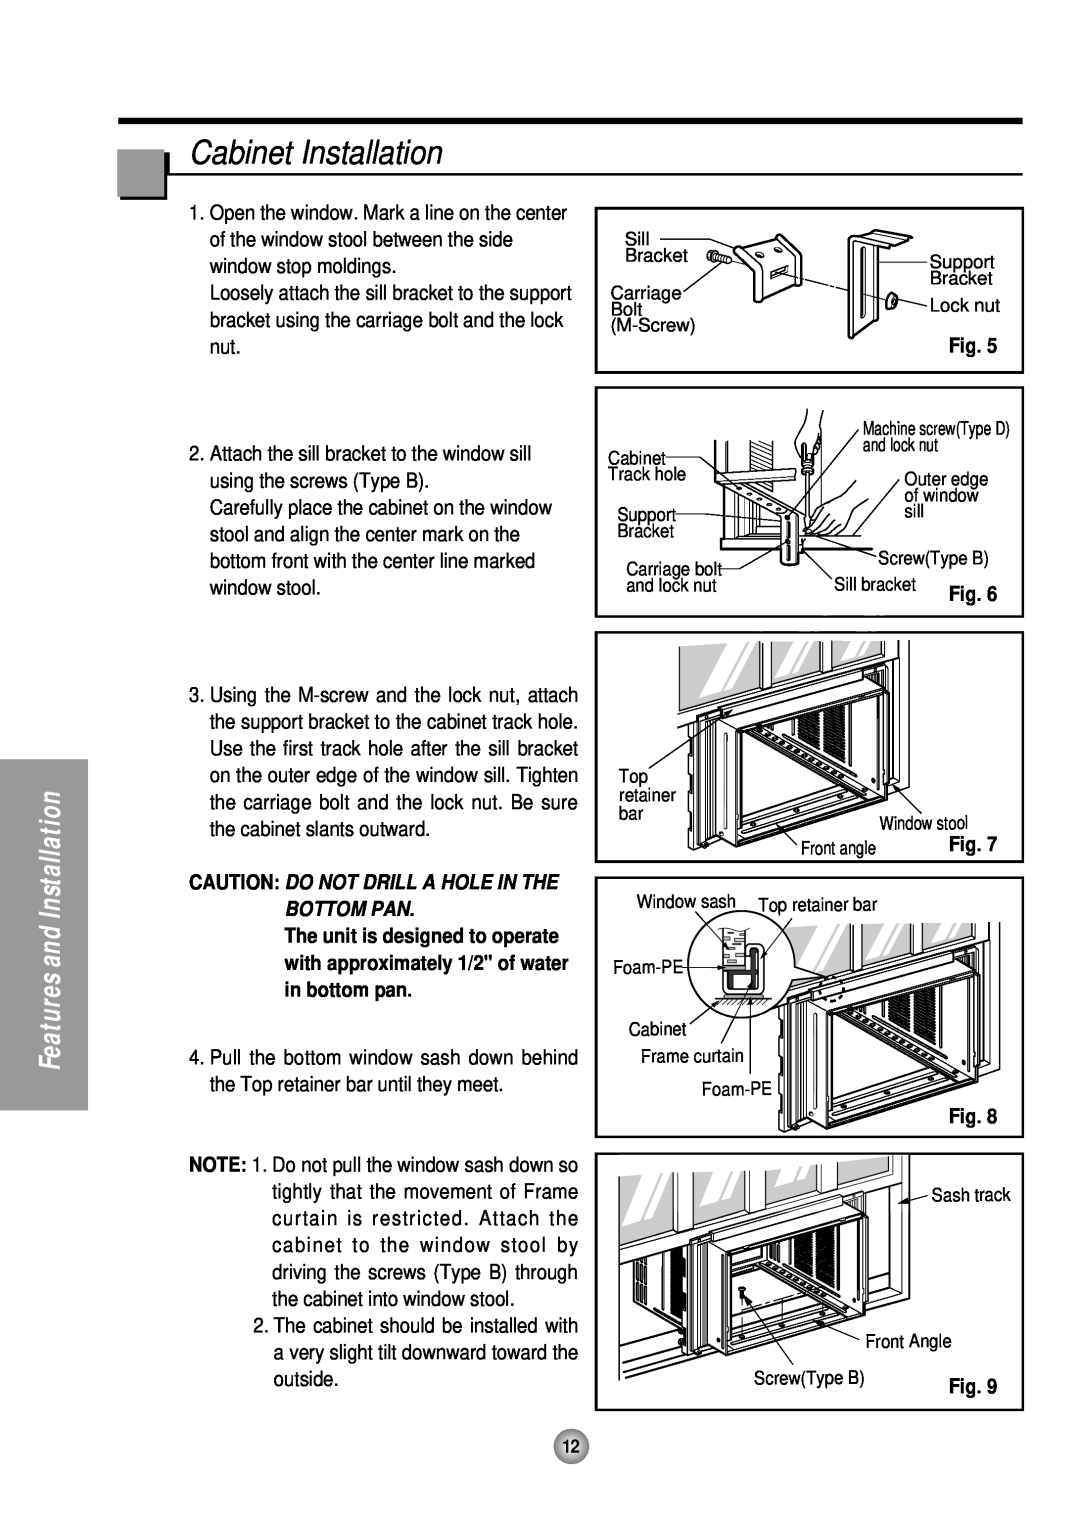 Panasonic CW-XC183HU manual Cabinet Installation, Caution Do Not Drill A Hole In The Bottom Pan, Features and Installation 